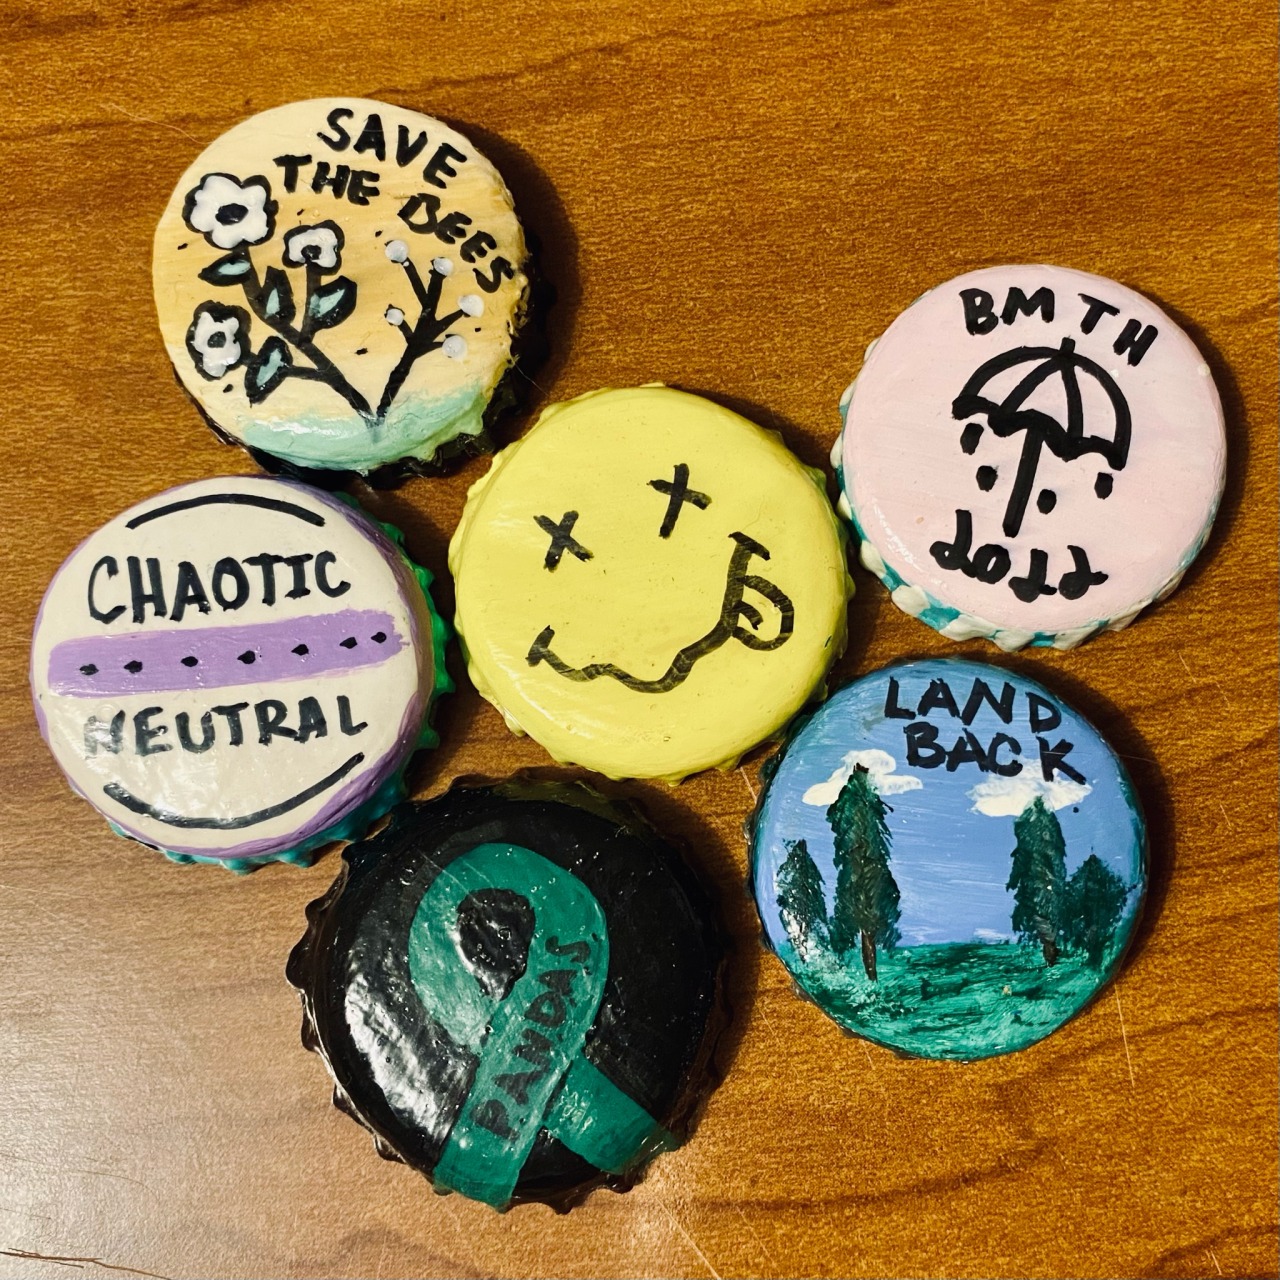 🎸Punks Not Dead🎸 — any ideas for what to put on bottle cap pins?